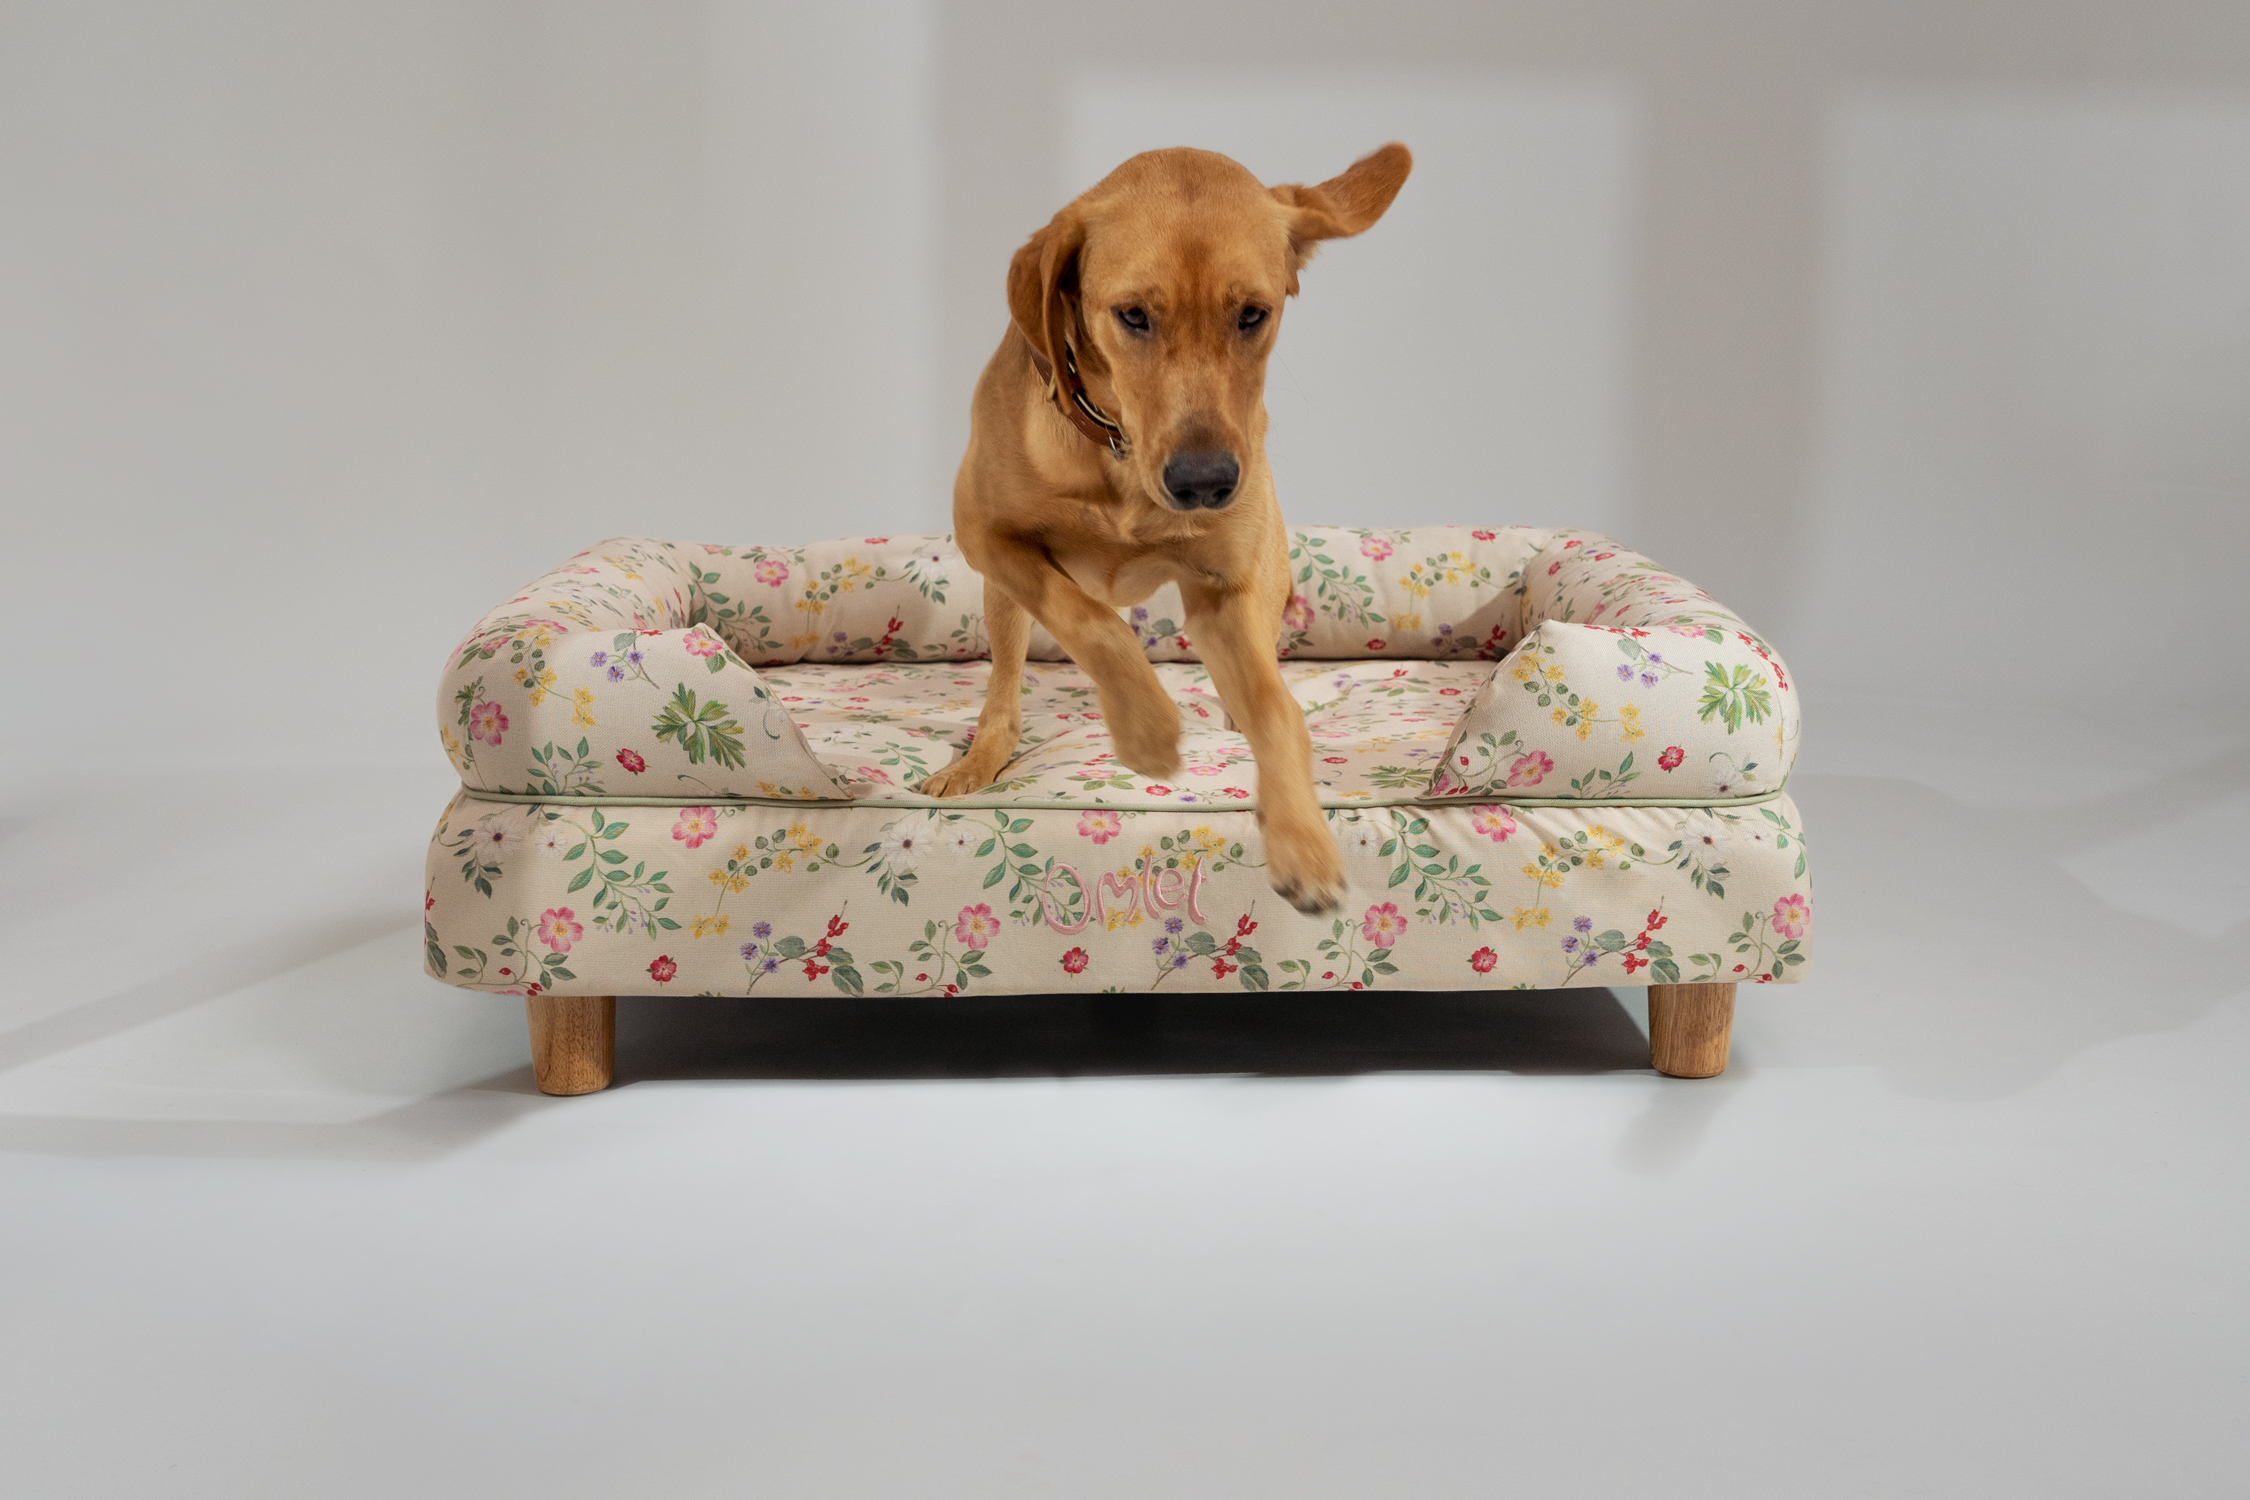 Fox red labrador jumping off large Omlet Bolster Dog Bed in floral Morning Meadow print.